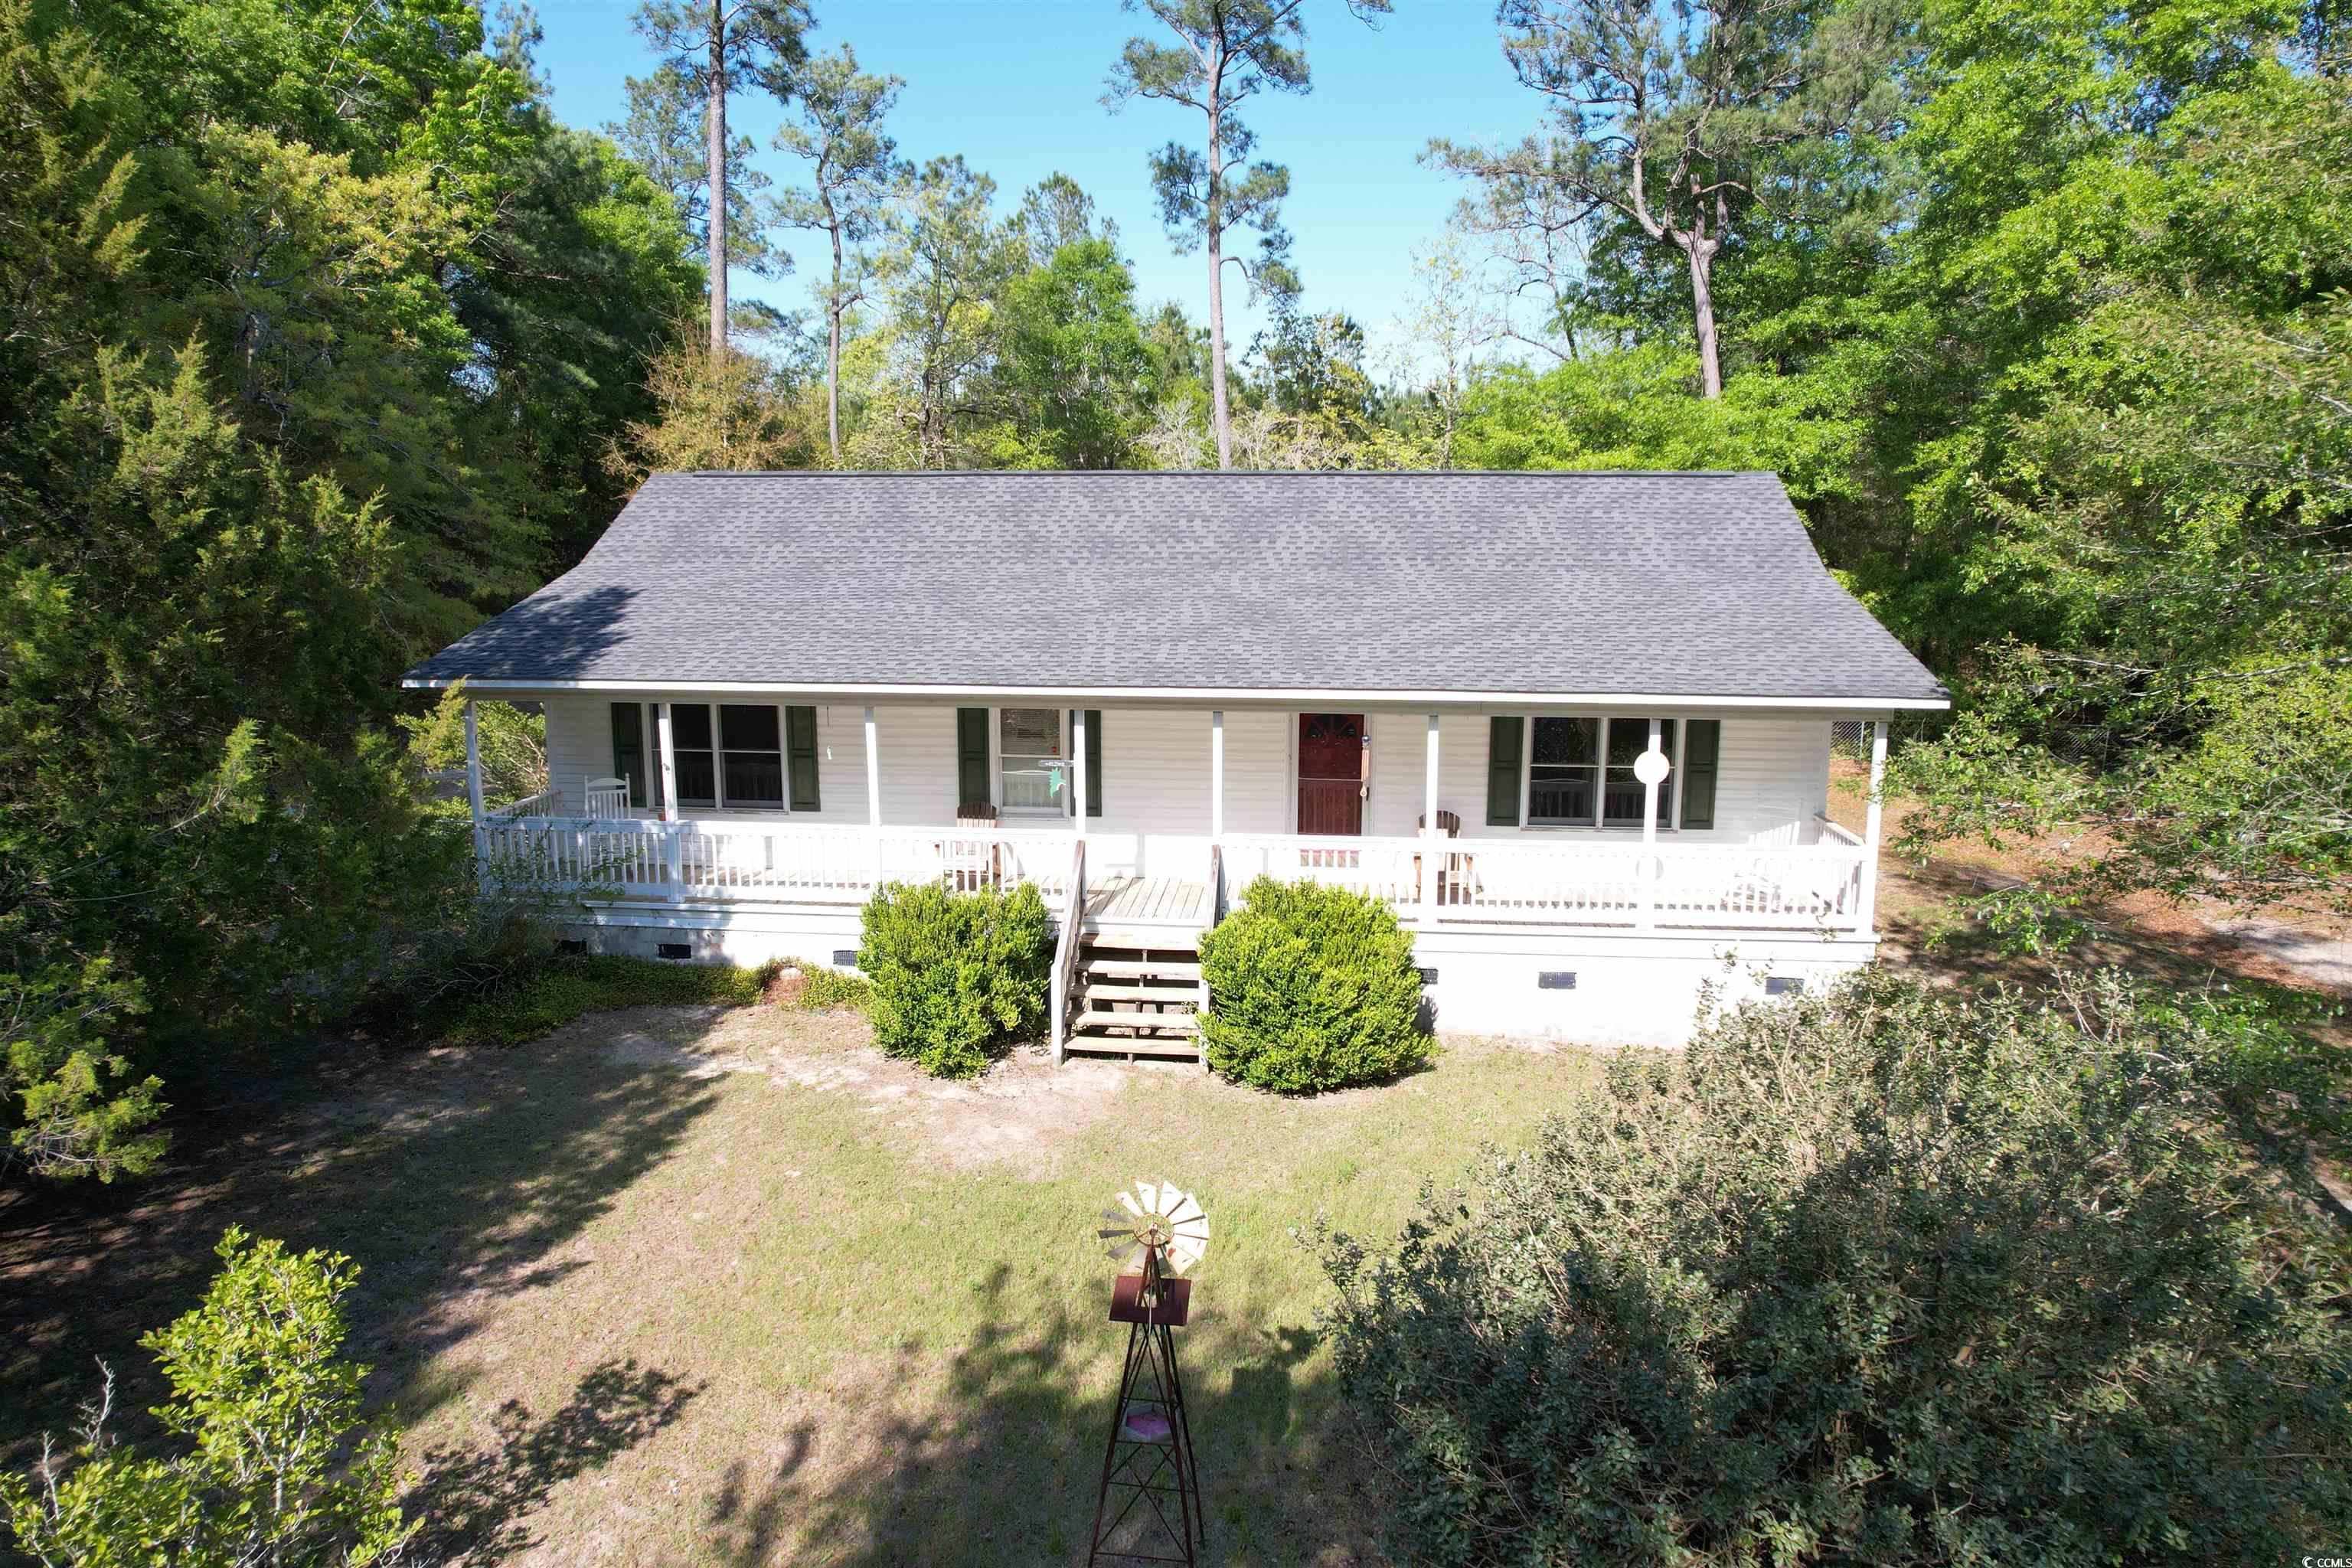 charming 3 bedroom, 2 bathroom ranch style home located on francis marion drive, across from black river. the home sits on 0.78 acres and is approximately 1,372 square feet. with an open concept, the front door opens to a living area, which is adjacent to the kitchen. the kitchen offers a large island across from the dining area. the primary bedroom offers a large space and has an en-suite bathroom with a double vanity and water closet. the remaining 2 bedrooms share a hall bath, and each are spacious in size. the yard is fenced in and offers a concrete slab for parking or entertaining. it also has a shed that measures 20x20 and is perfect for storing all of your items or for a man cave or she-shed! the home received a new hvac in 2016 and a new roof in 2018. this home is approximately 3 miles from browns ferry landing!